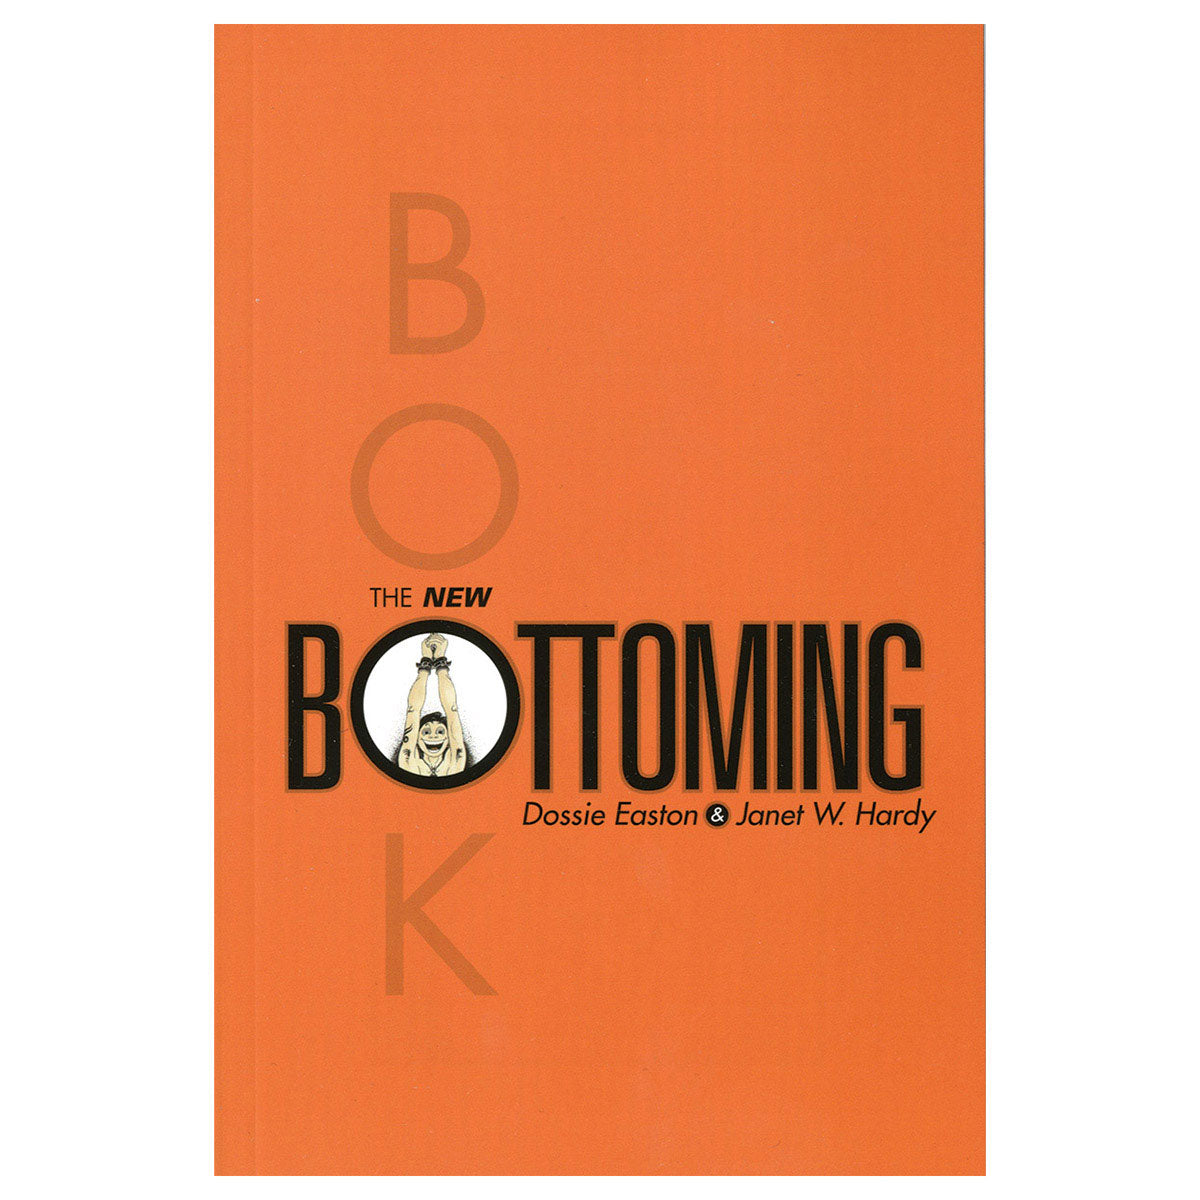 The New Bottoming Book